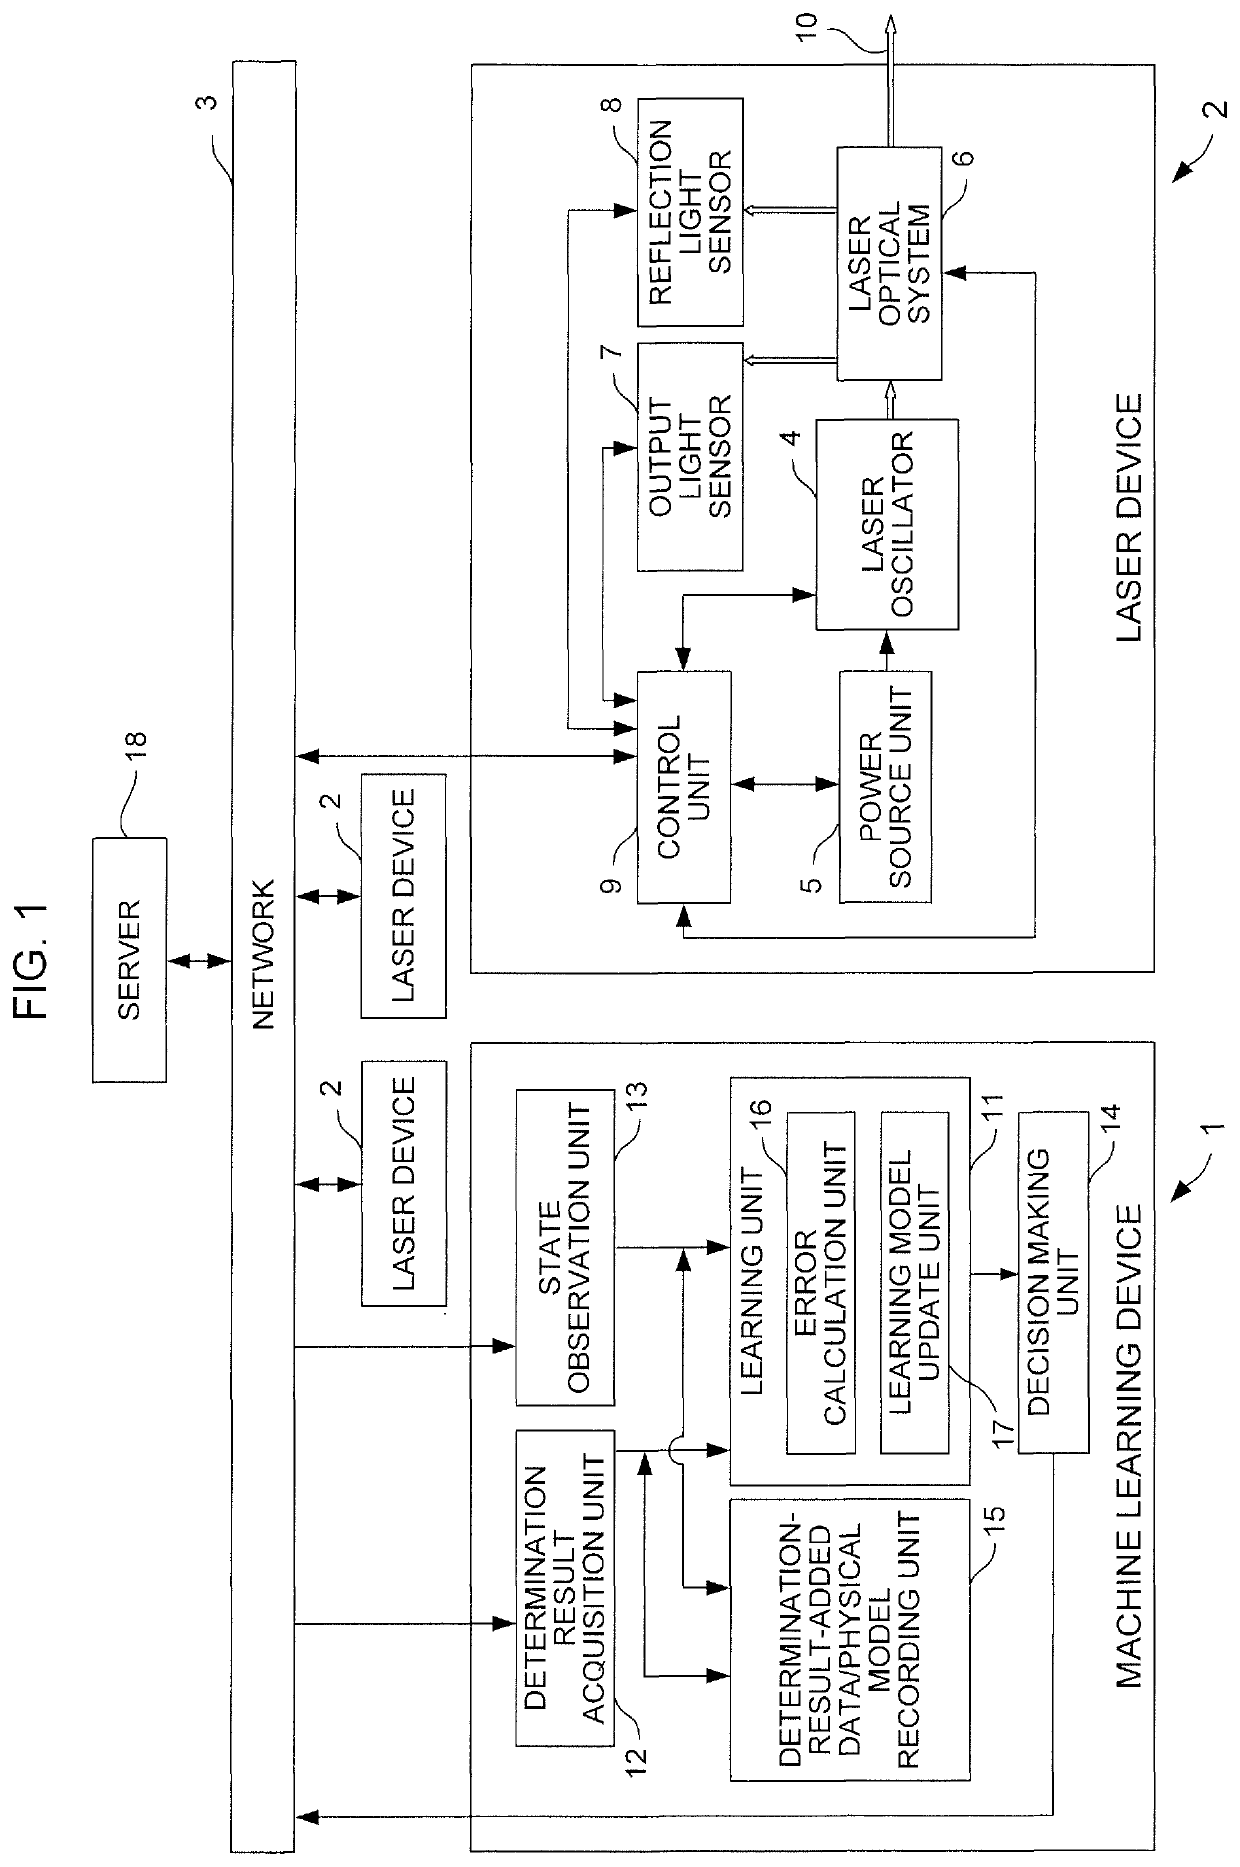 Machine learning device learning failure occurrence mechanism of laser device